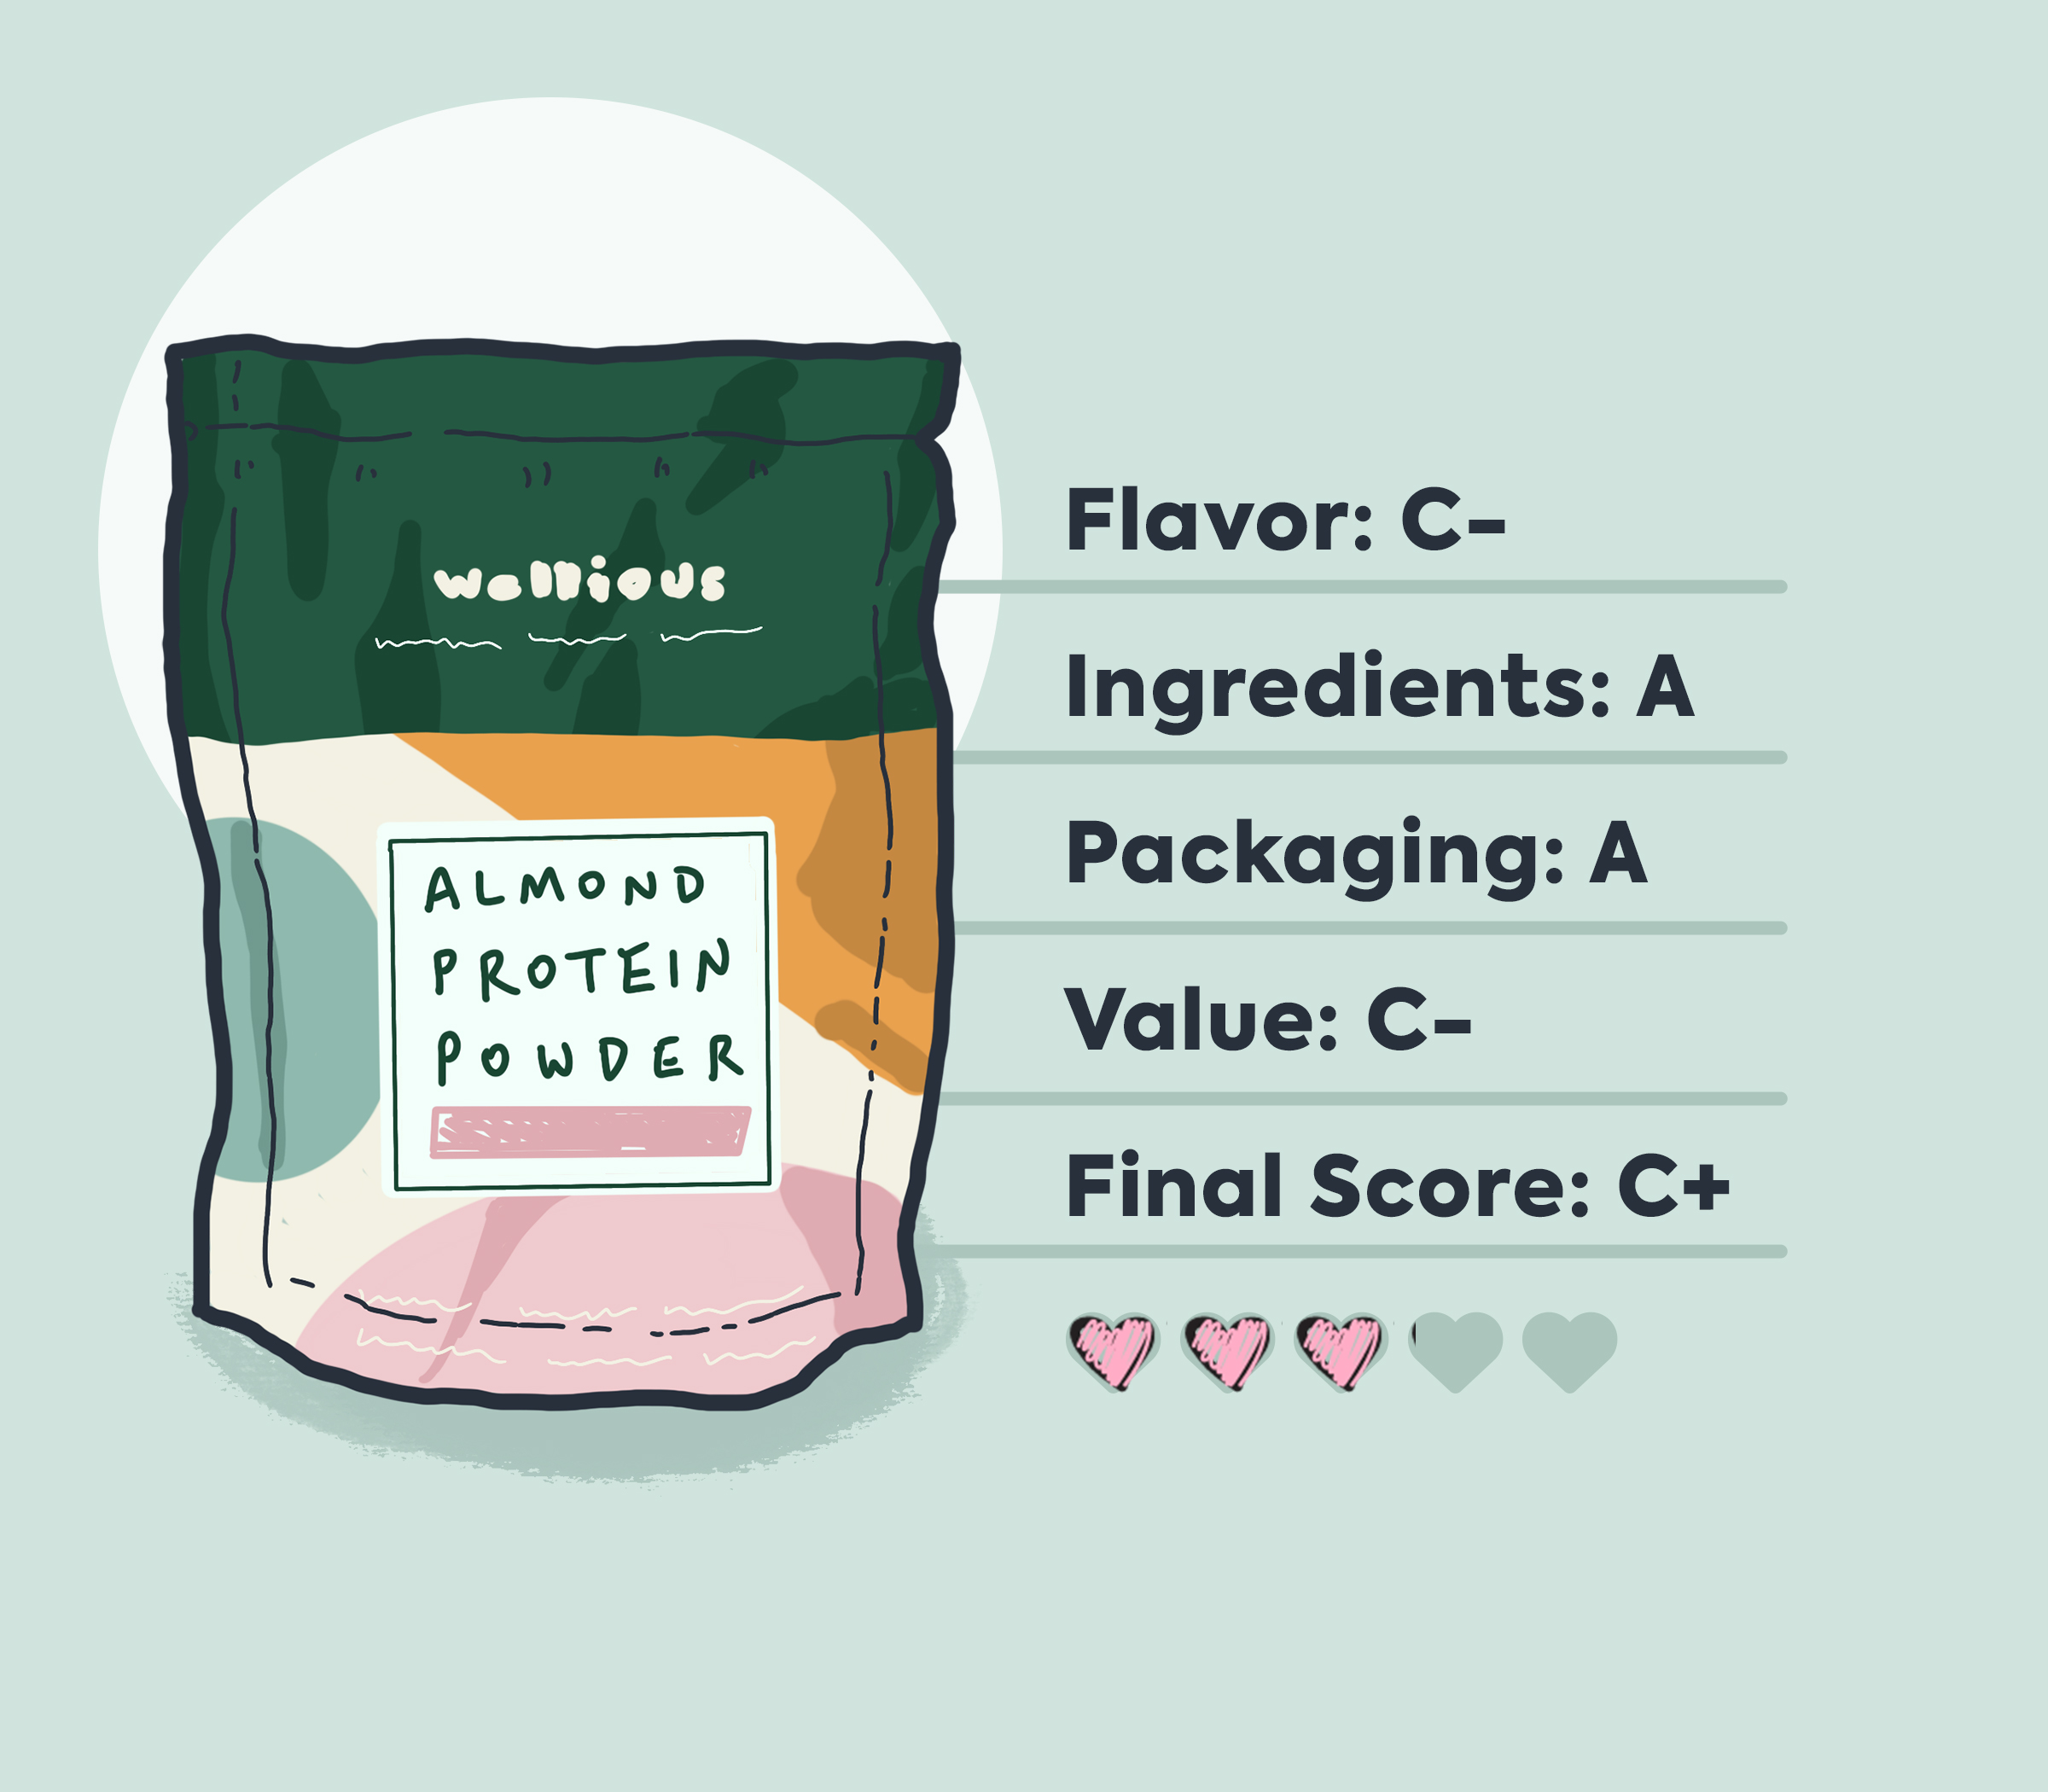 wellious almond protein amazon packaging illustration with review information by category